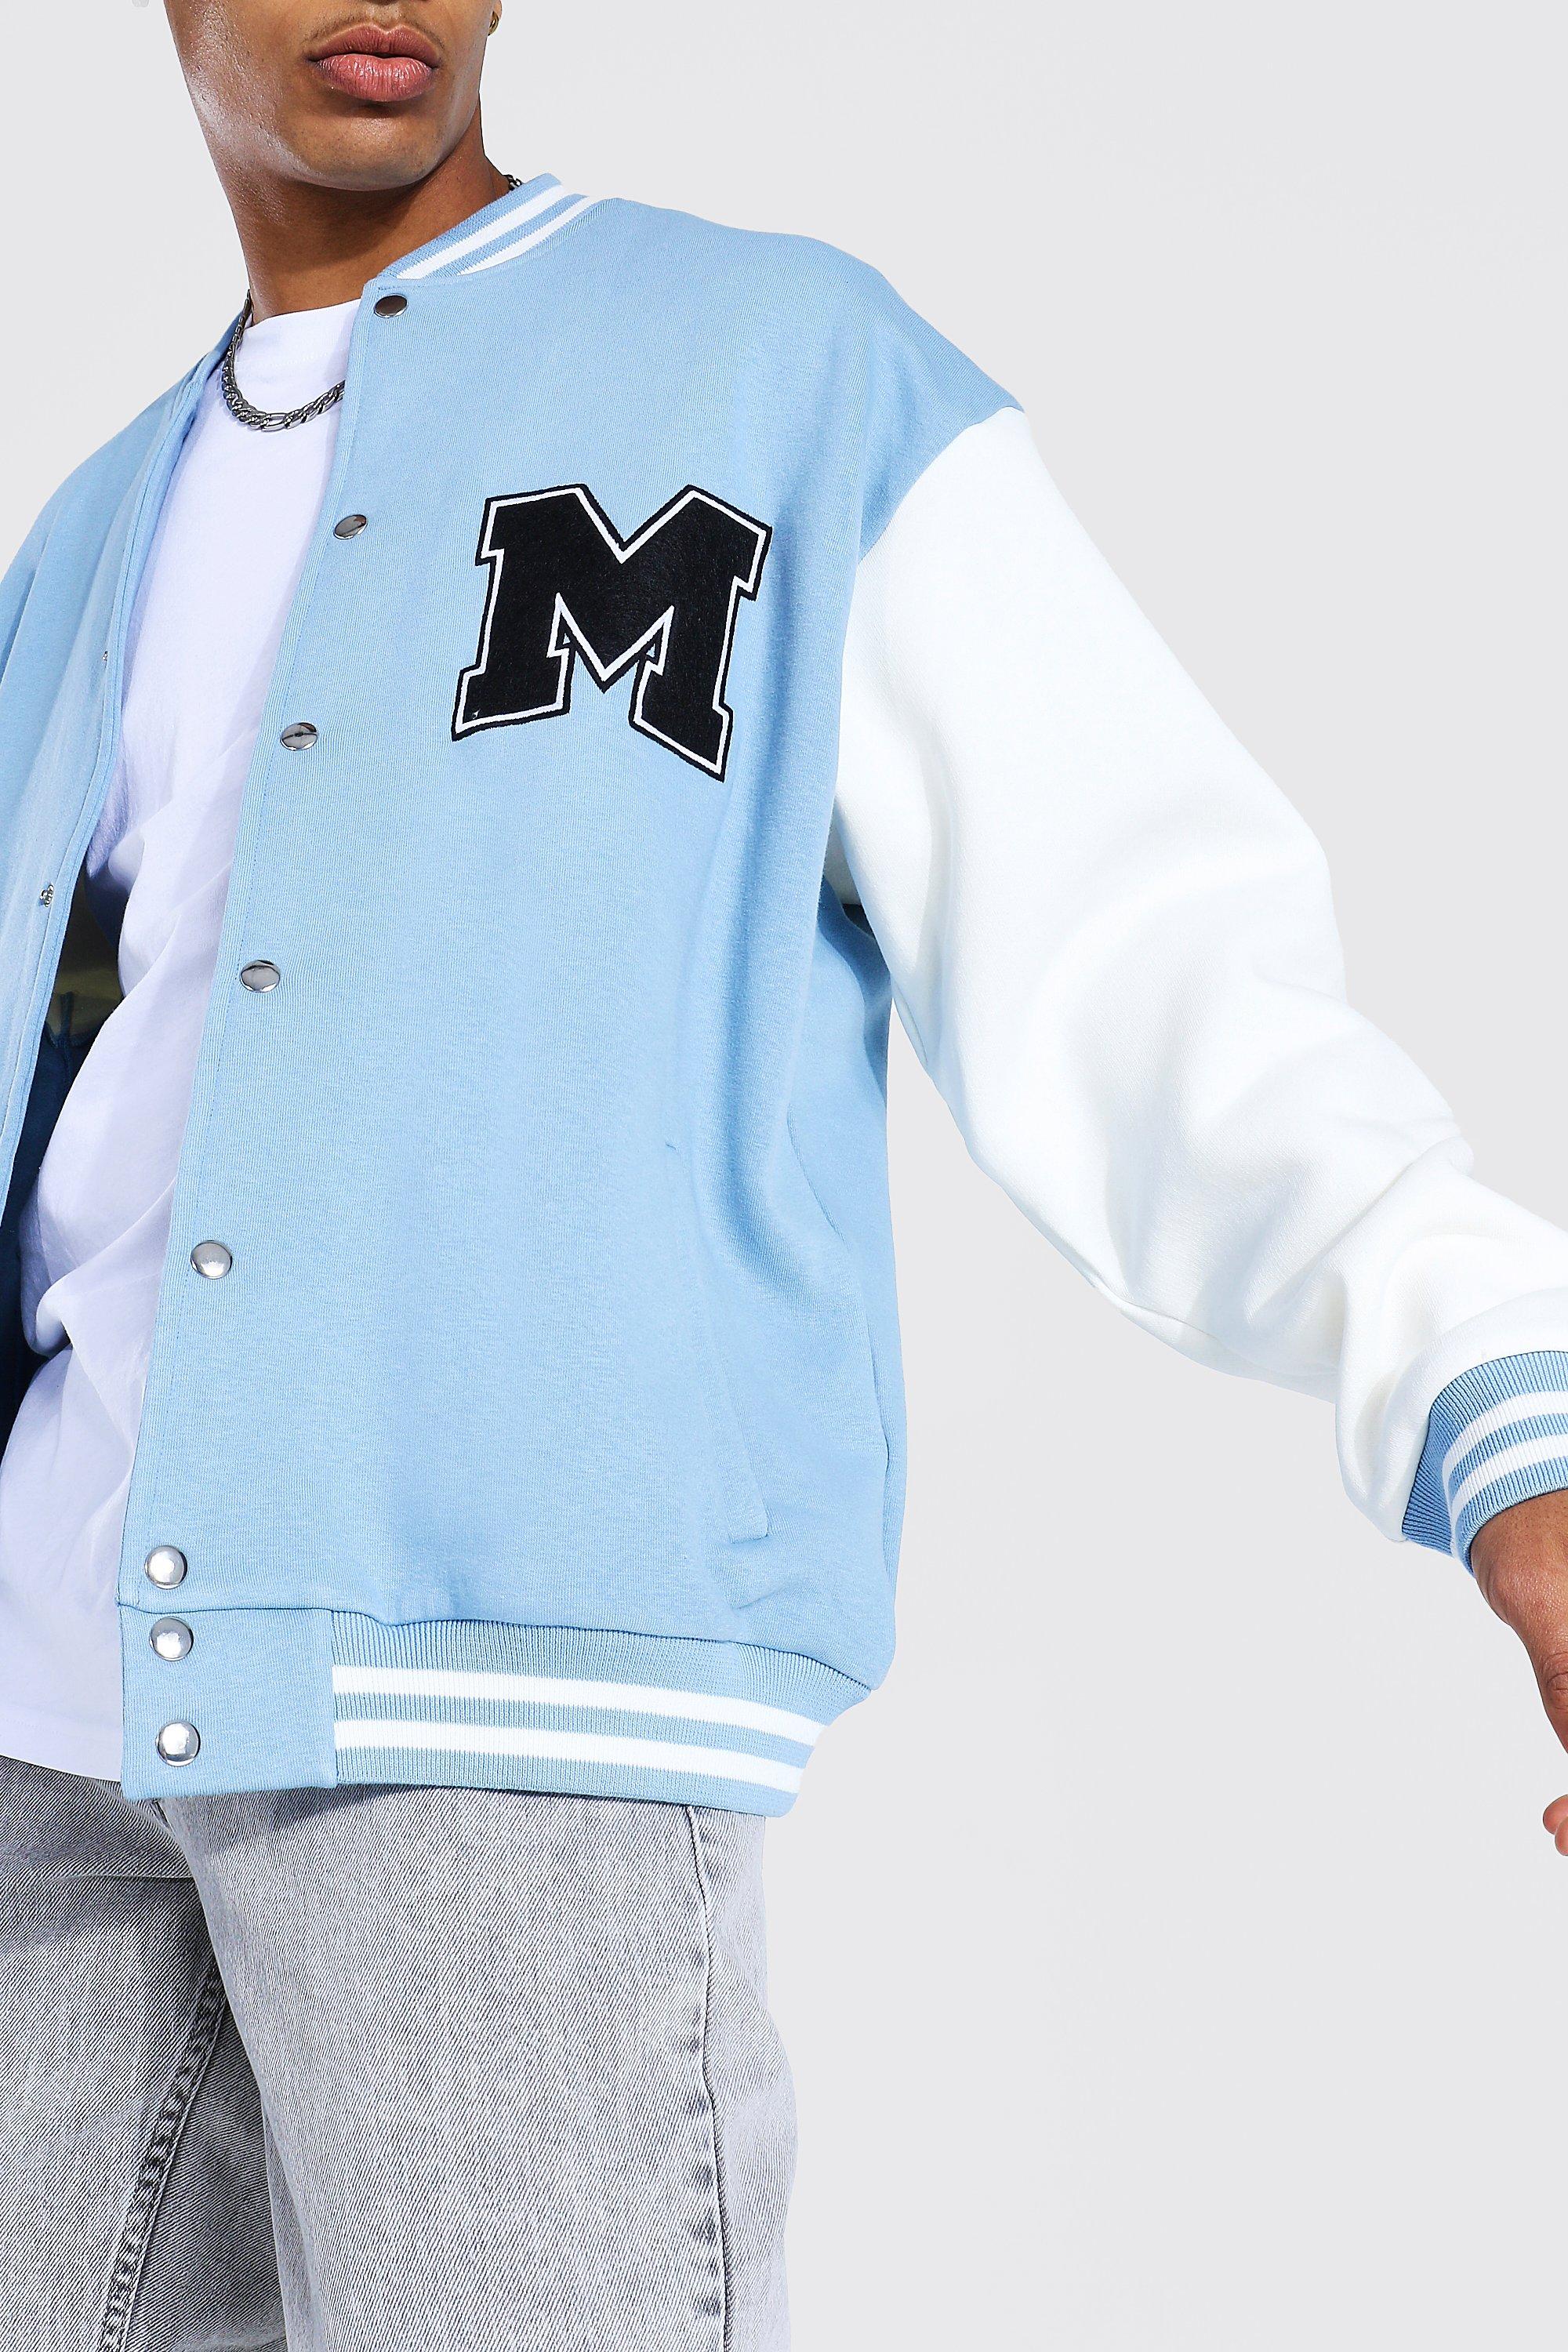 GORGLITTER Men's Letter Patch Color Block Baseball Bomber Jacket Button  Front Long Sleeve Varsity Jackets with Pockets Blue and White Small at   Men's Clothing store